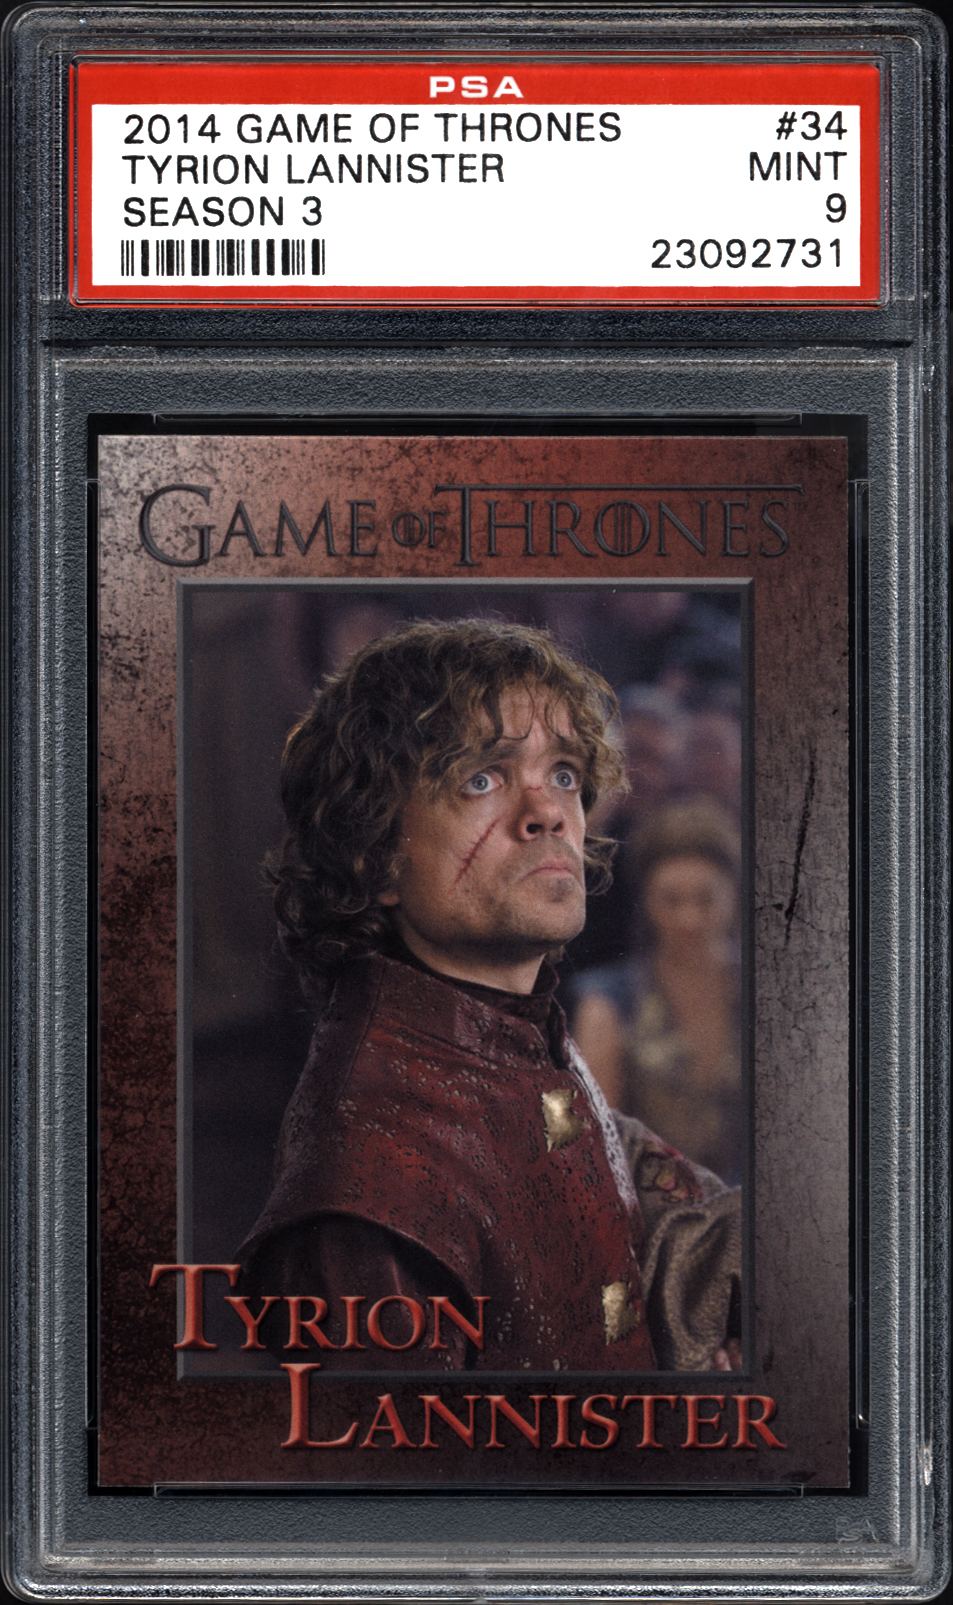 While supplies last, PSA will give away various examples  of Game of Thrones and X-Men cards at the 2014 San Diego Comic-Con.